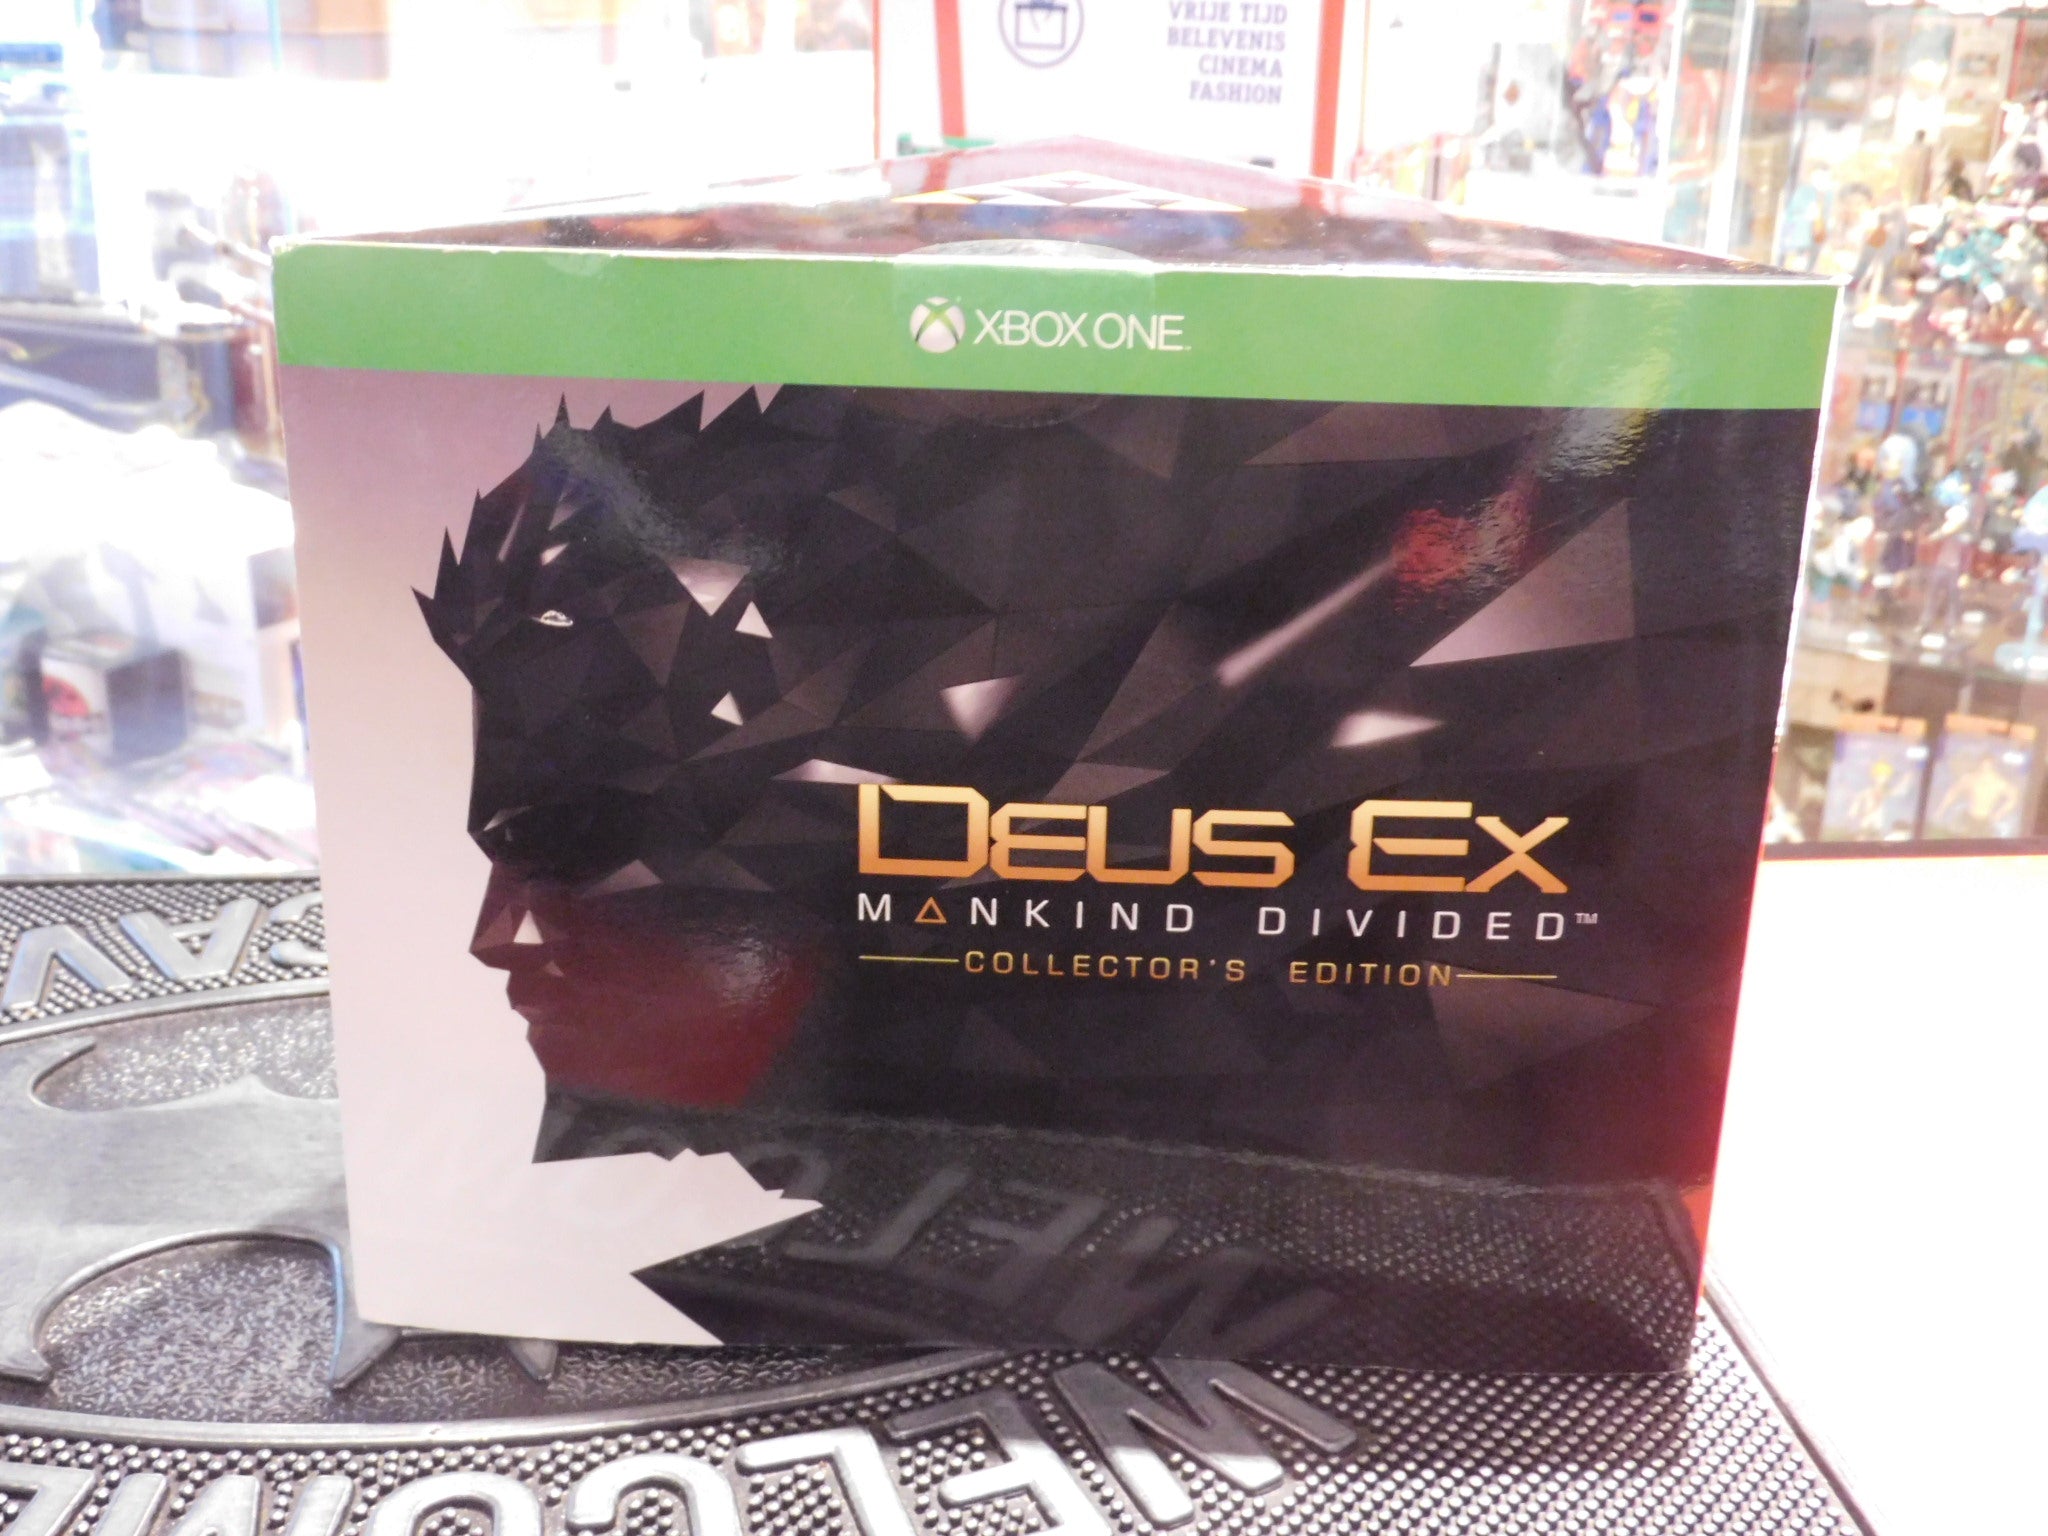 DEUS EX MANKIND DIVIDED COLLECTOR'S EDITION